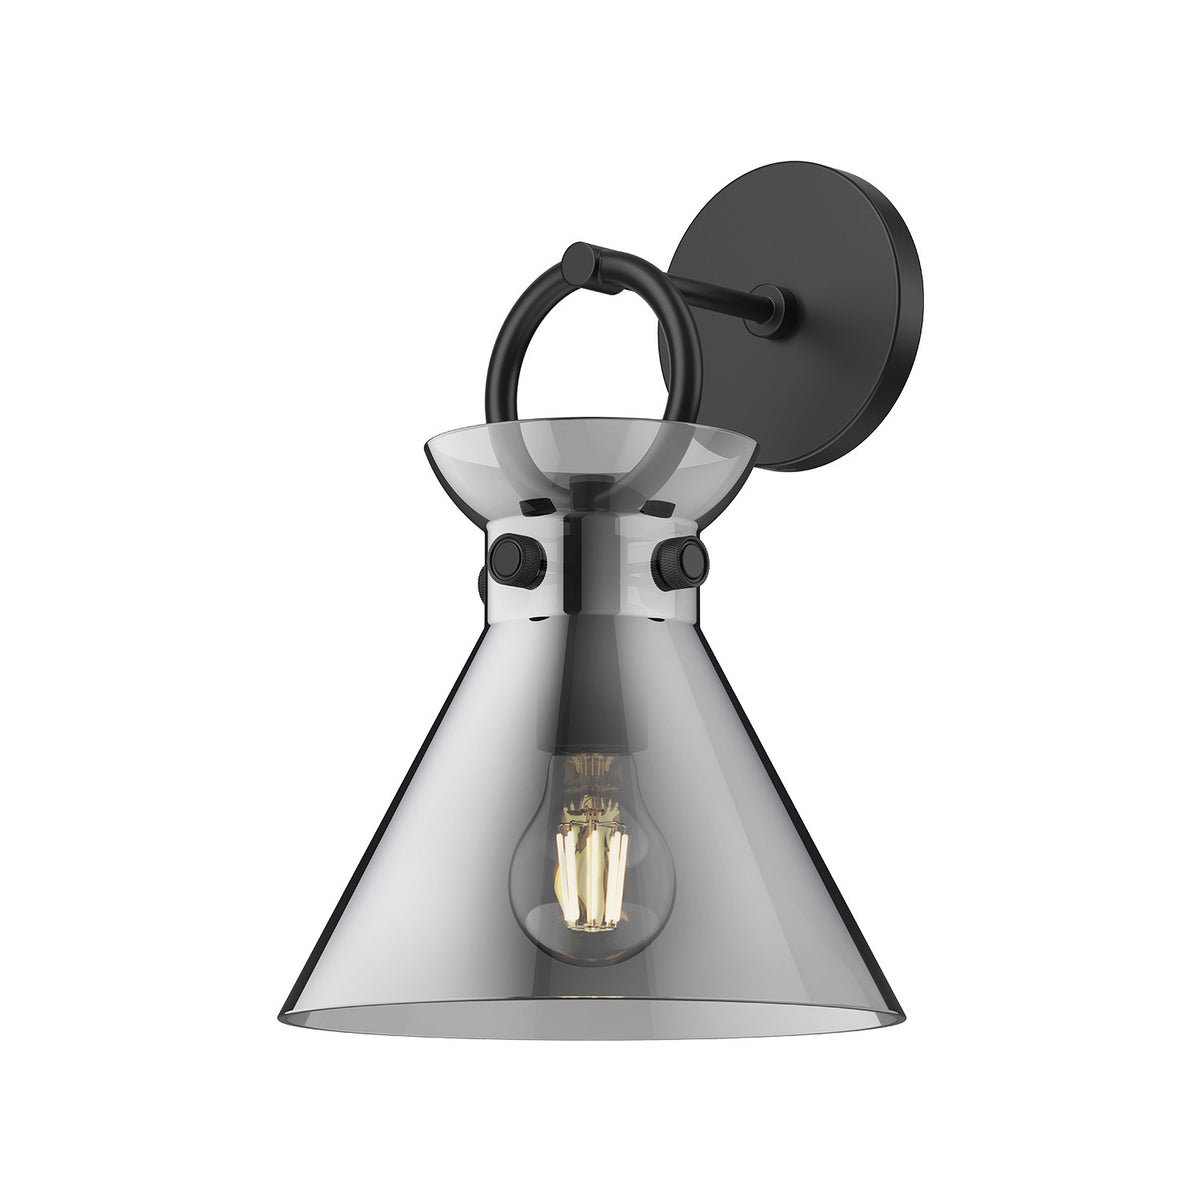 Alora Canada - WV412509MBSM - One Light Wall Sconce - Emerson - Matte Black/Smoked